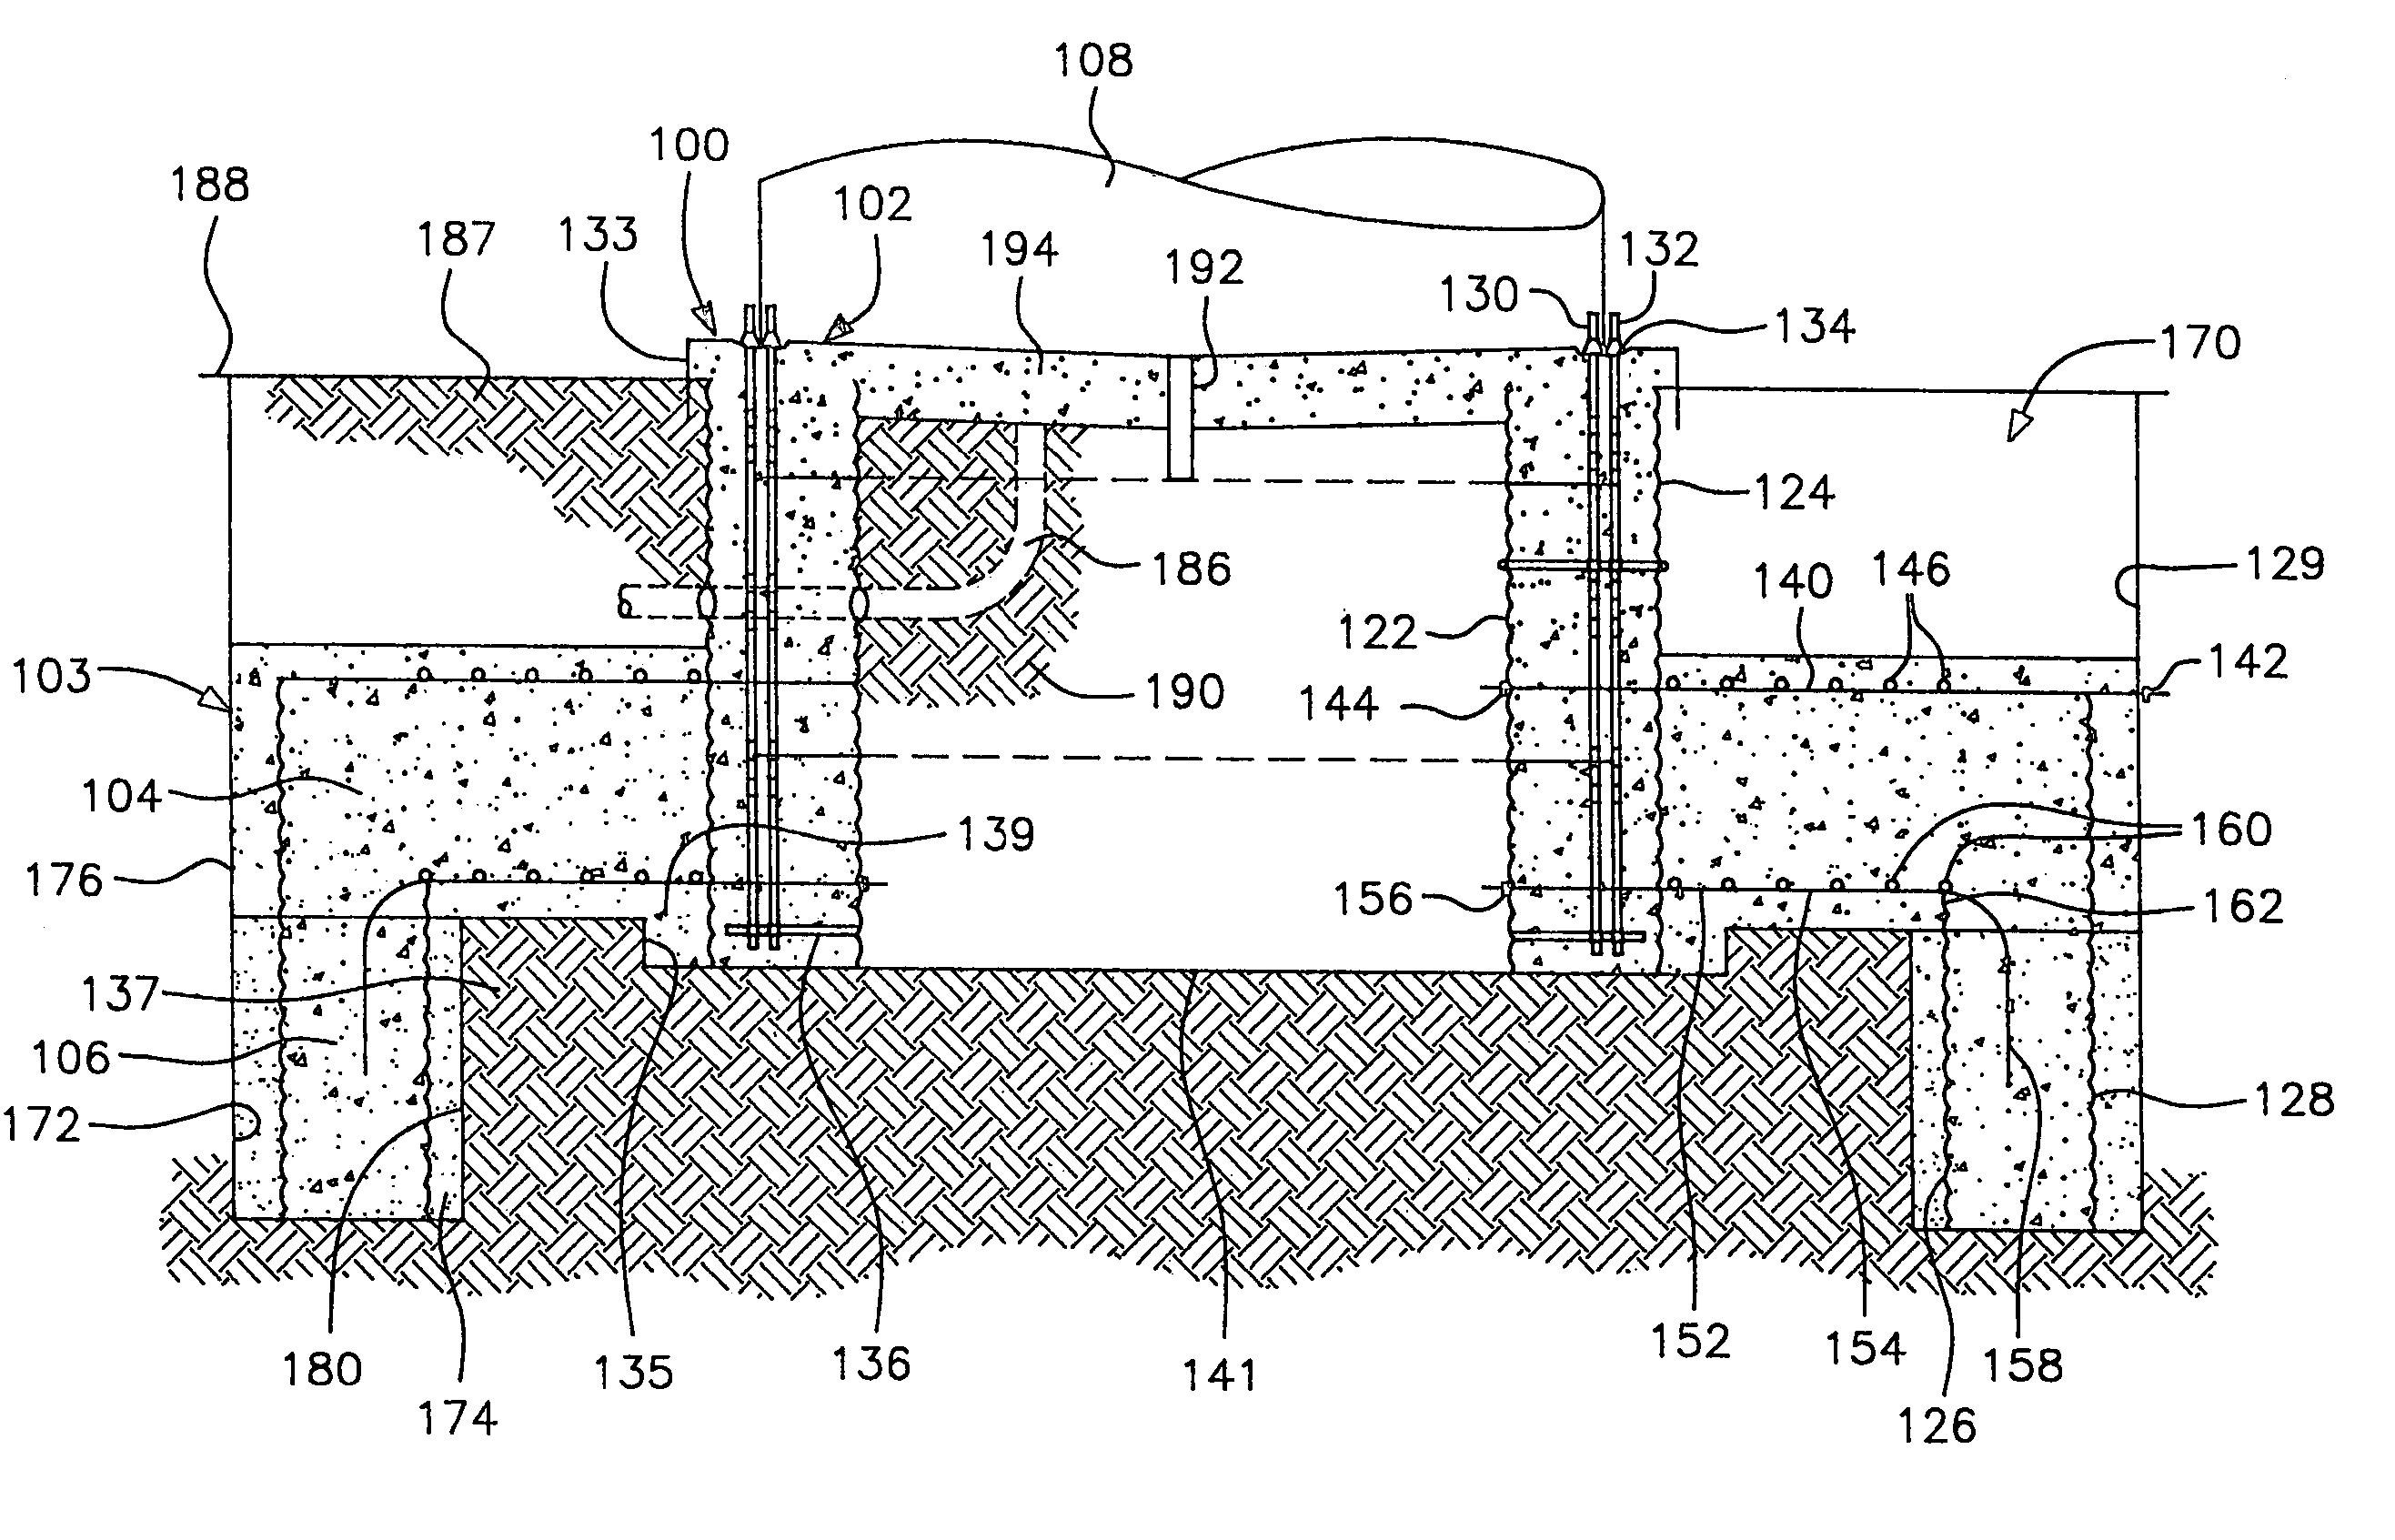 Method of forming a perimeter weighted foundation for wind turbines and the like